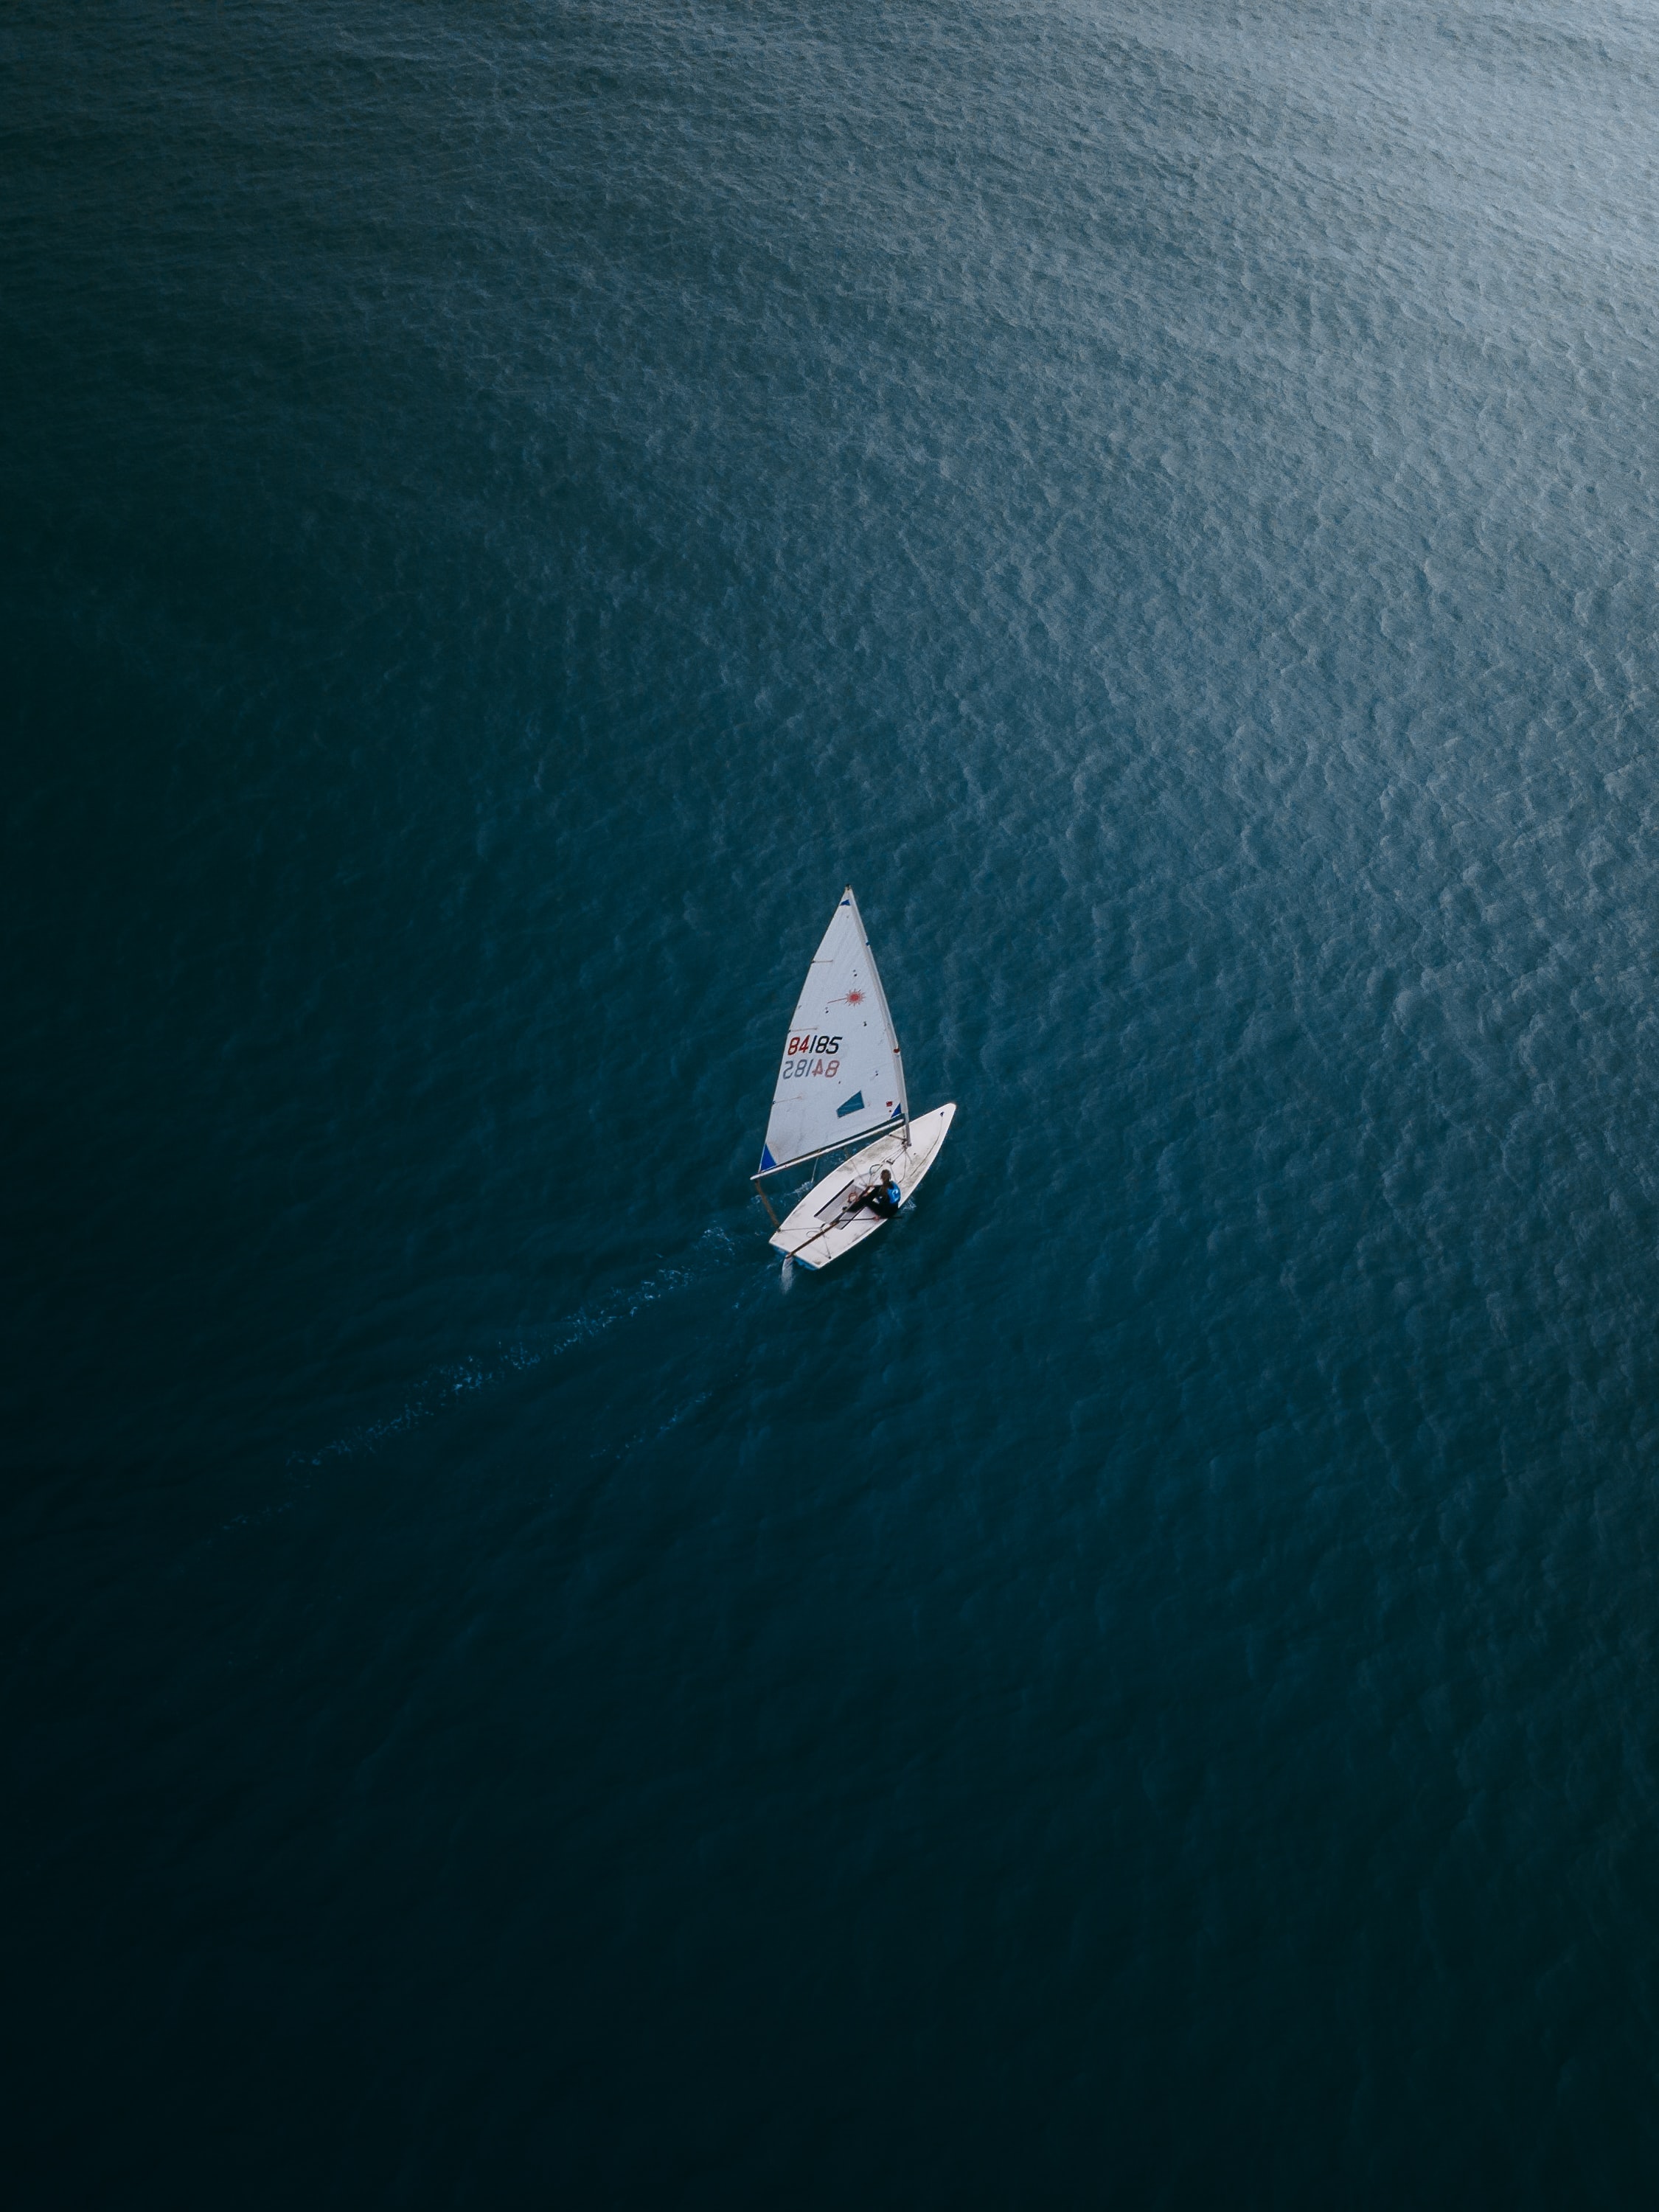 sea, boat, loneliness, water, view from above, miscellanea, miscellaneous cellphone